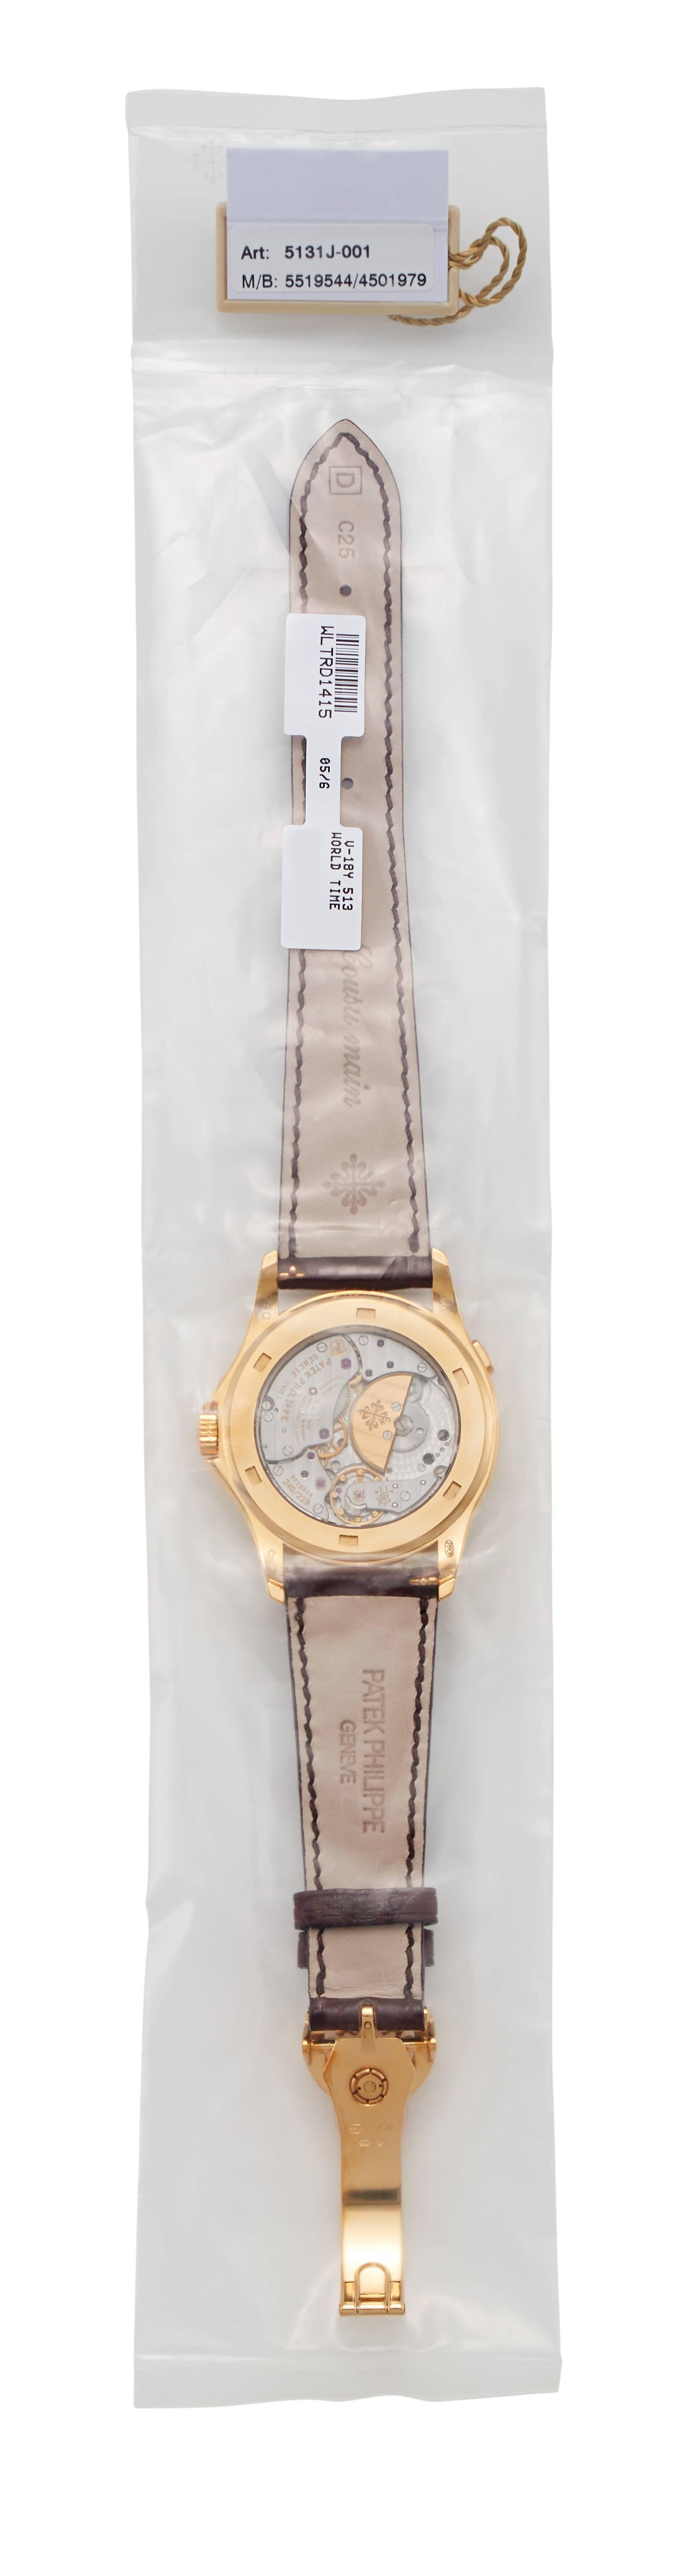 Vintage Patek Philippe 5131J-001 

The watch features an automatic movement with an exhibition back. The watch
is factory sealed.  Movement:  5519571/4501974

Celebrated World Time watch, with a finely executed cloisonée enamel center dial, in 18k